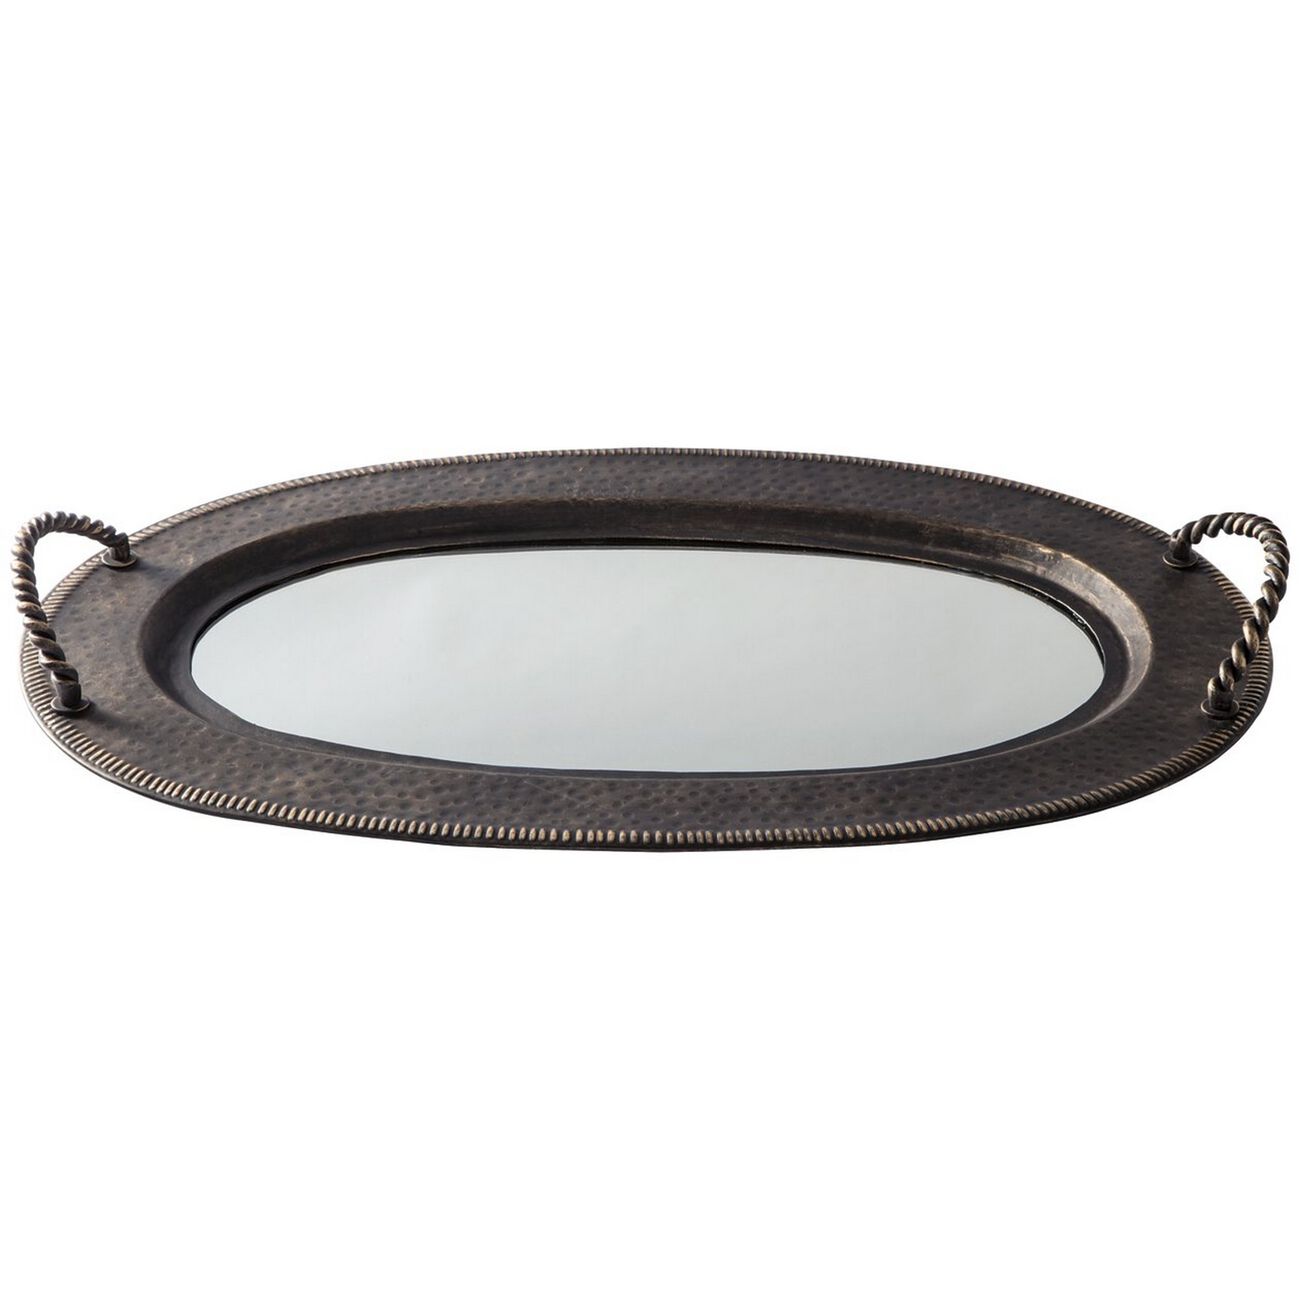 Oval Shape Tray with Mirror Trim and Braided Handle, Gray and Gold